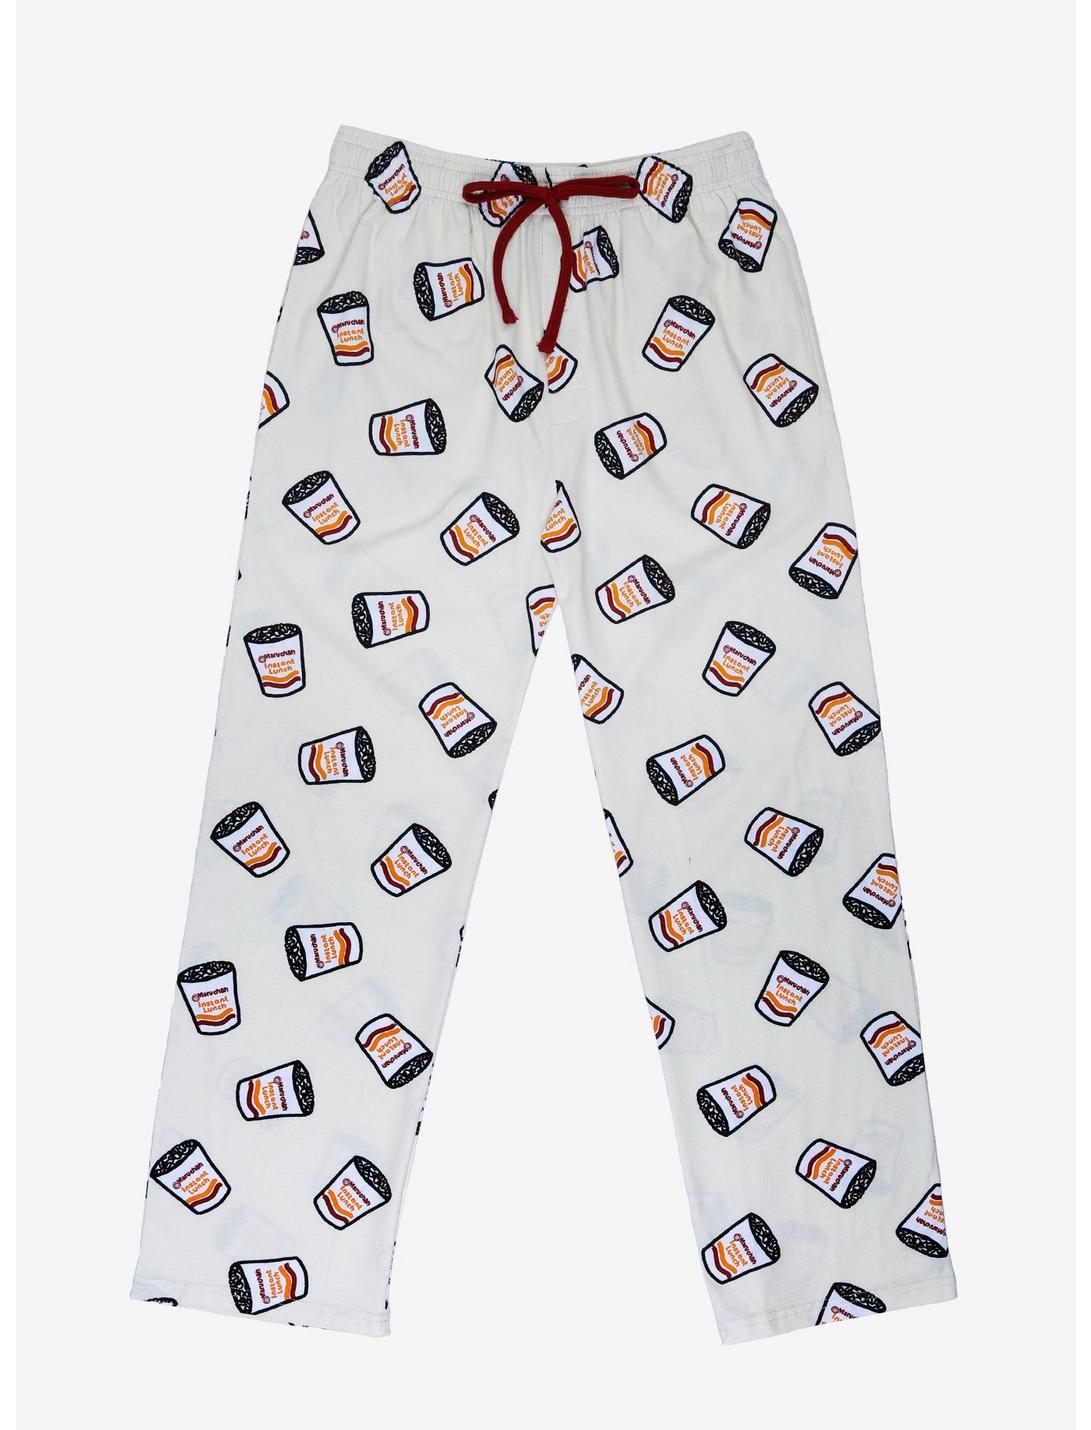 Maruchan Instant Lunch Allover Print Sleep Pants - BoxLunch Exclusive, MULTI, hi-res